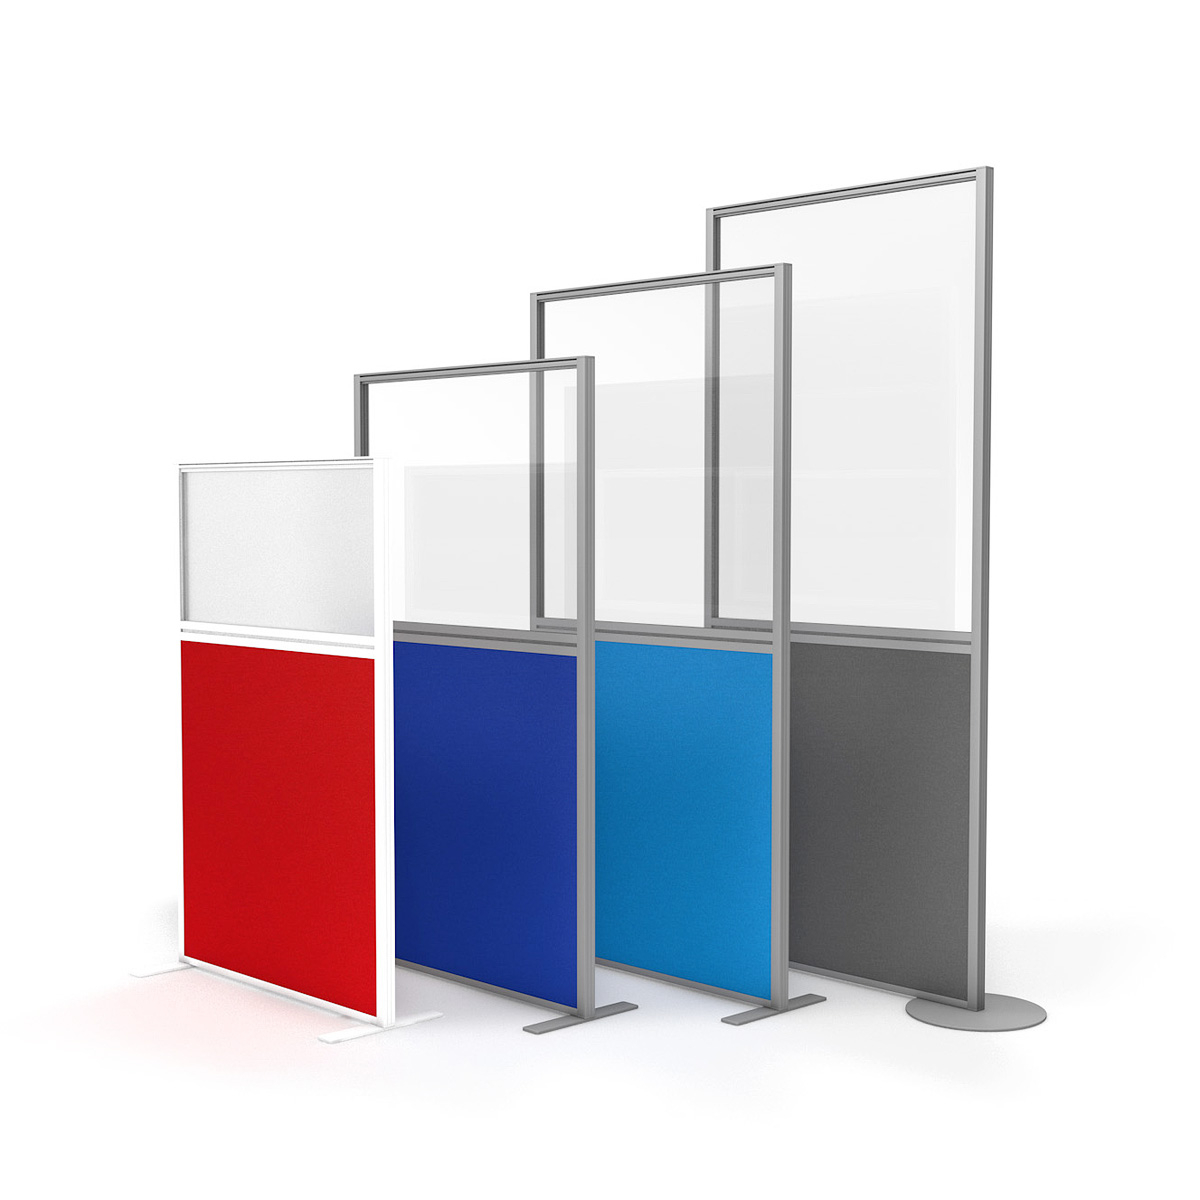 FRONTIER® Free Standing Top Vision Office Screens Are Available in Four Heights and Six Widths